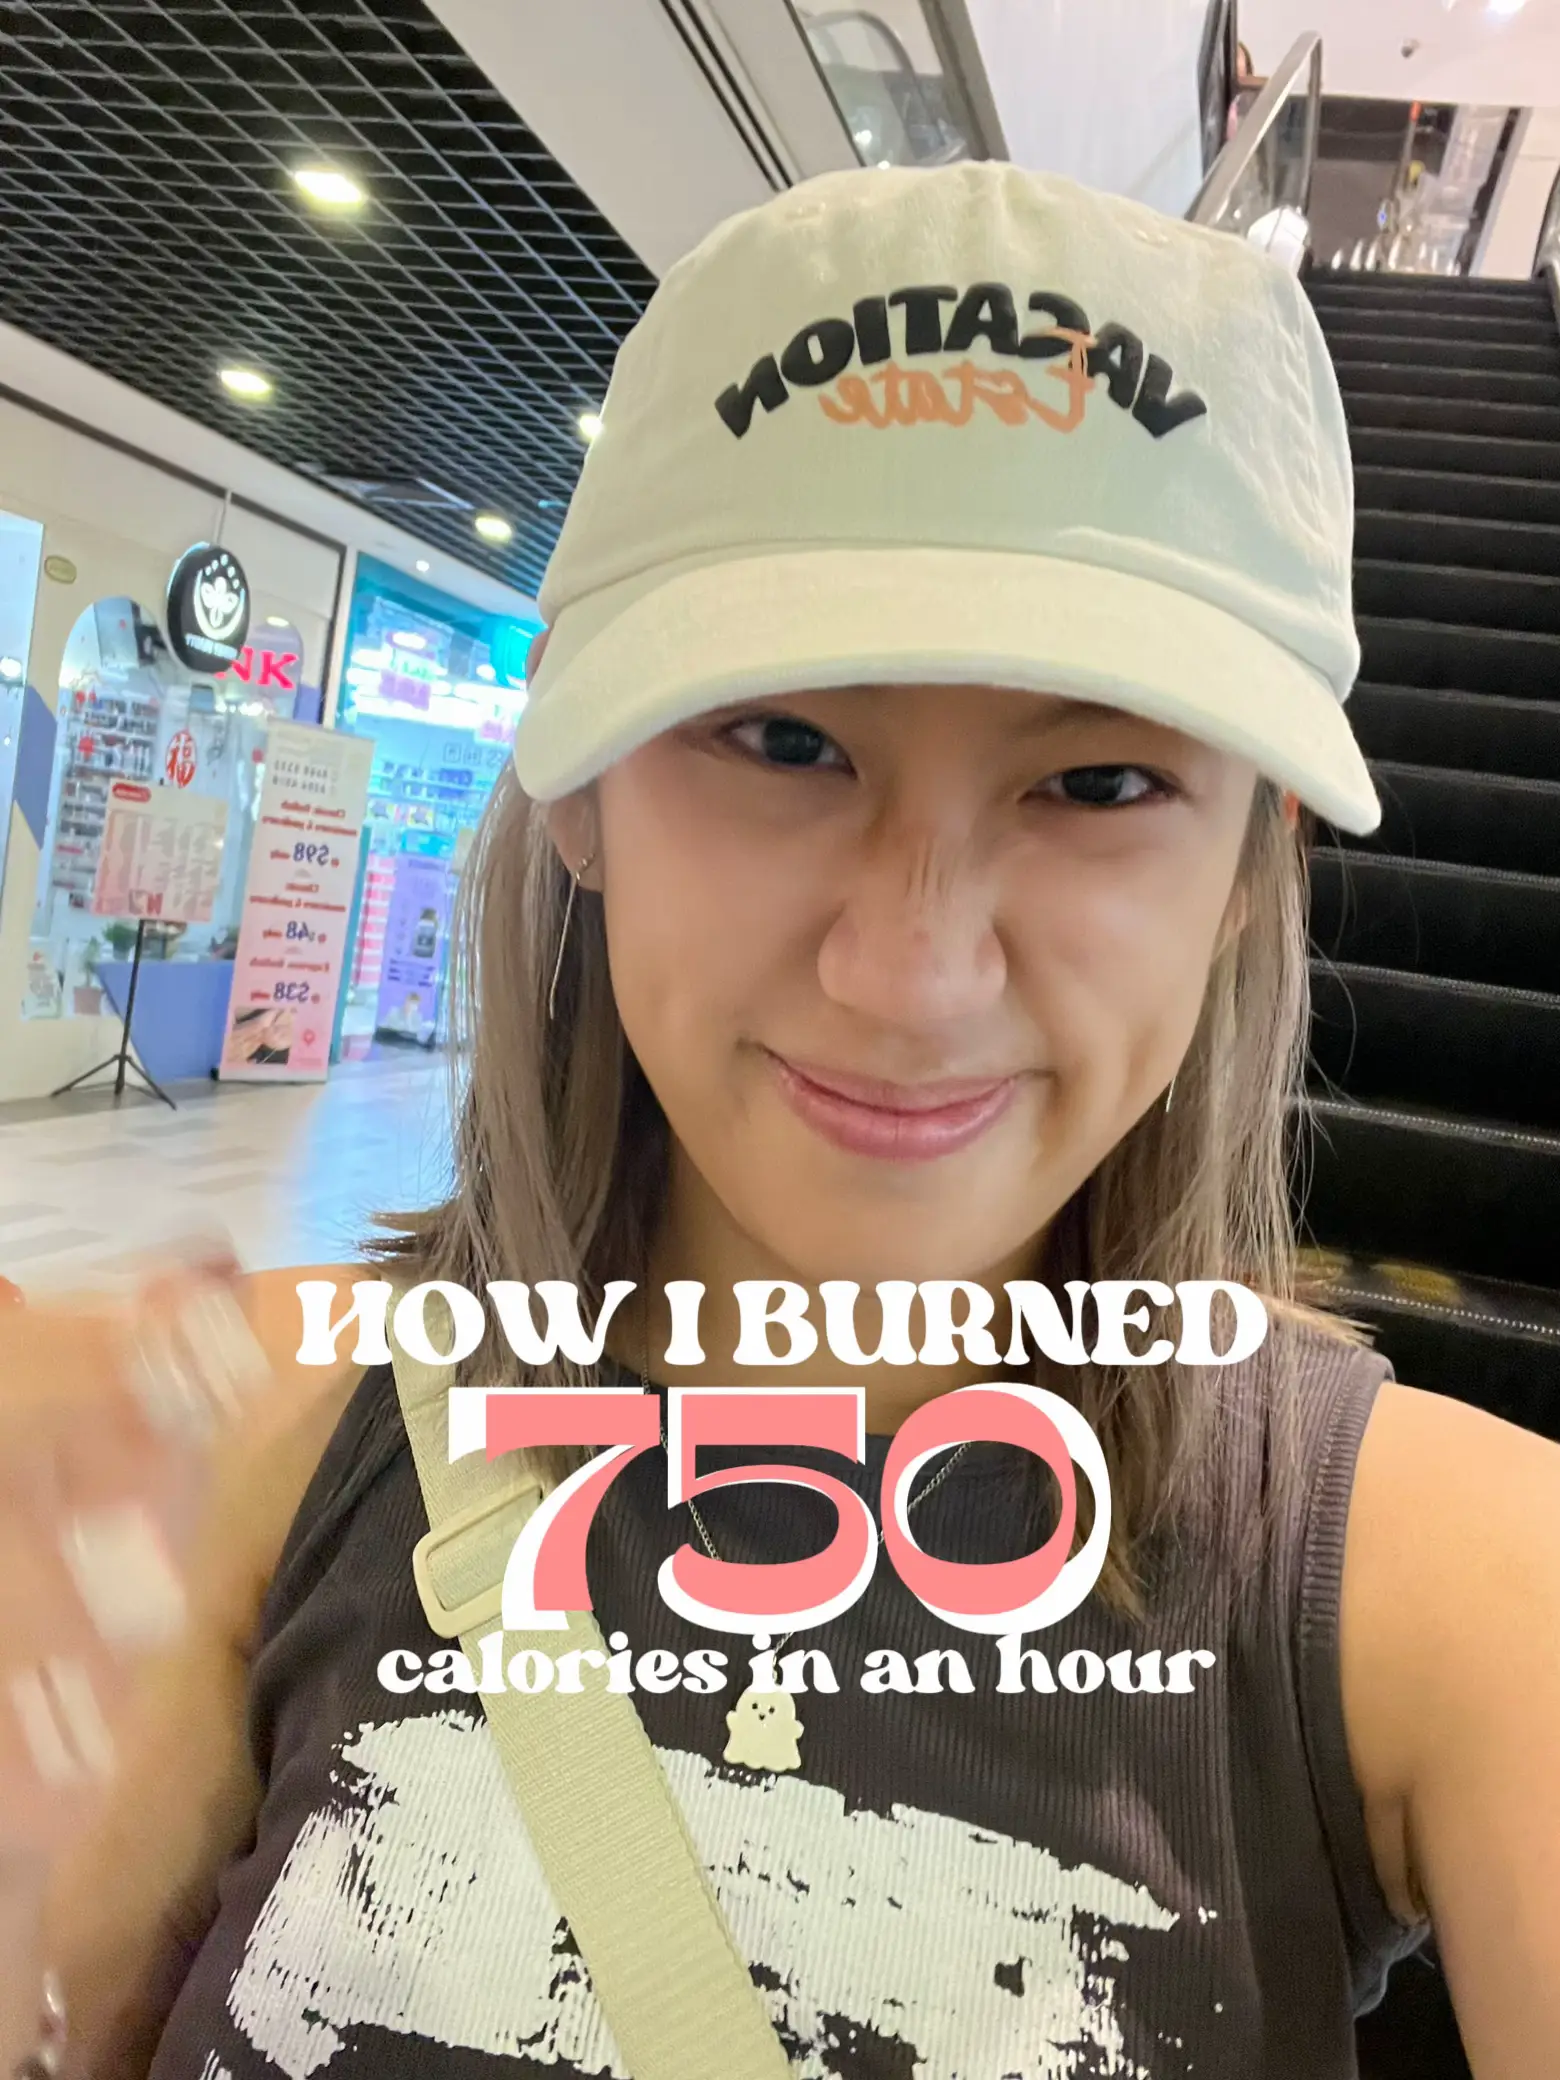 750 CALORIES IN LESS THAN AN HOUR 😌😌😌's images